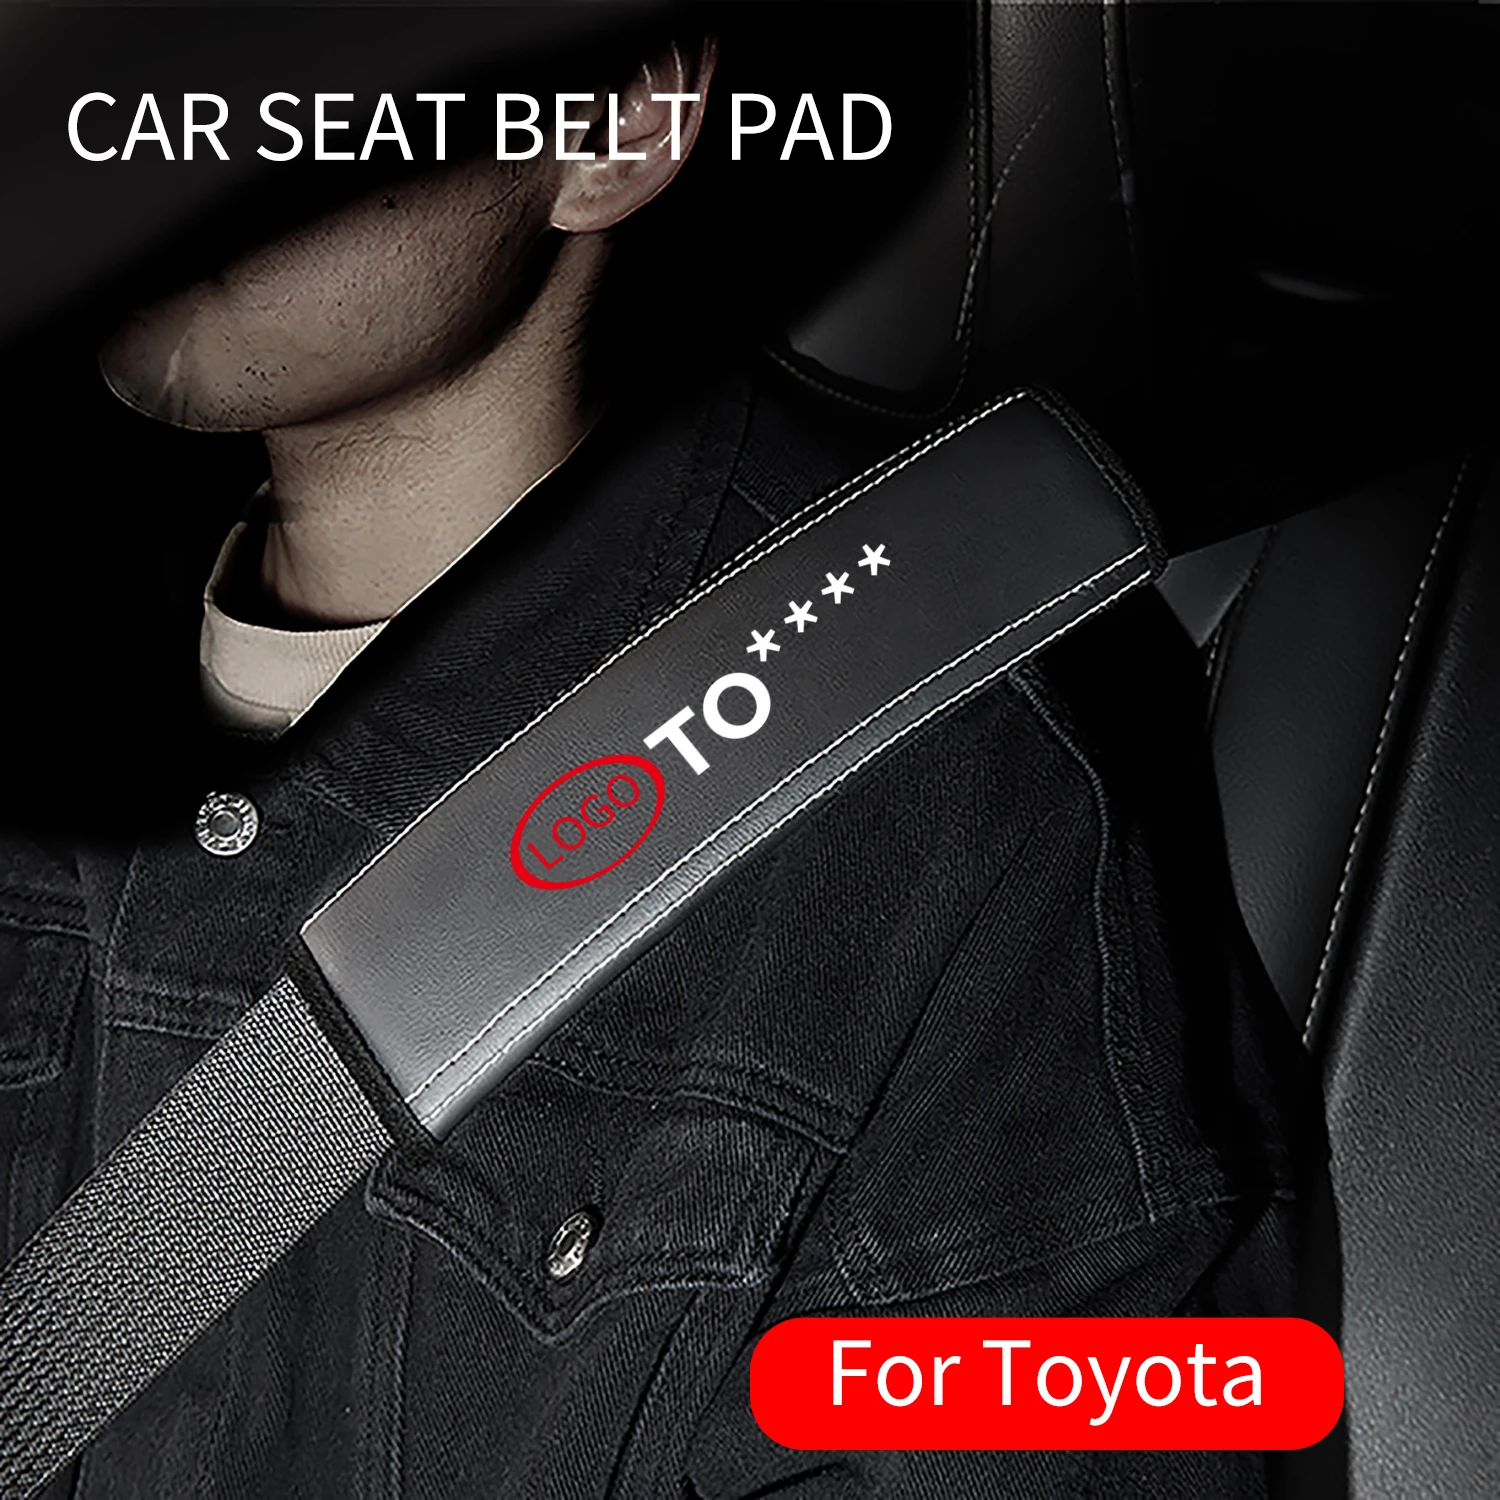 Seat Belt Pads 2PCS Leather Safety Belt Shoulder Cover Protector For Toyota camry 40 corolla e150 prius hilux tacoma prado 150